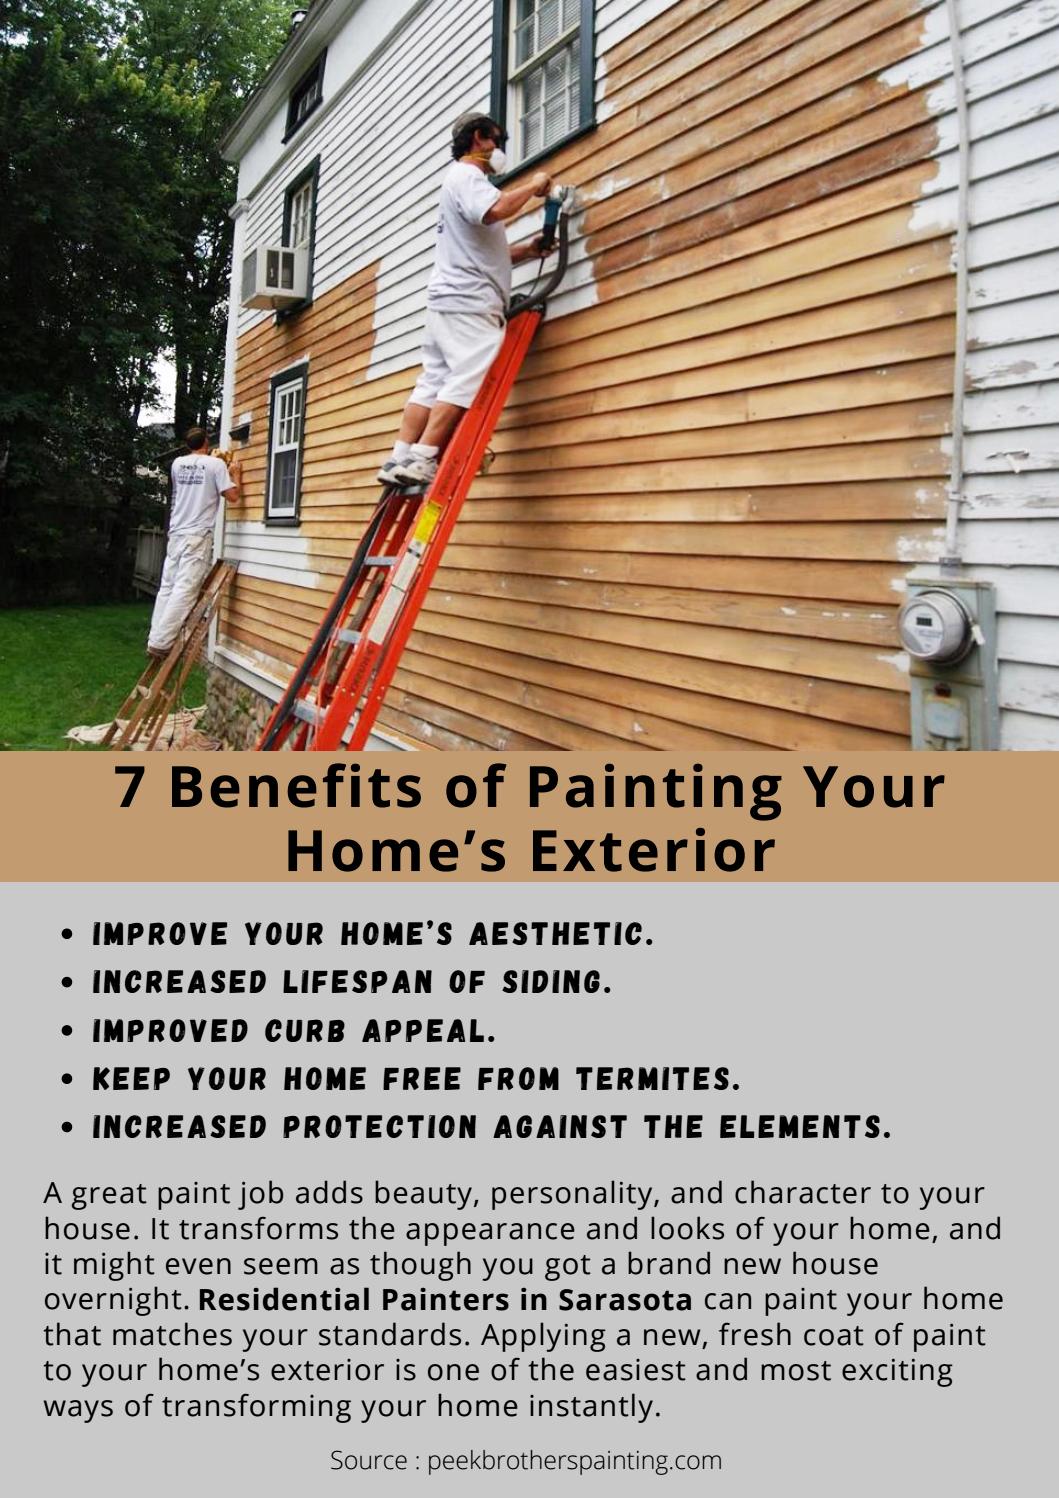 Residential Painting: Enhancing the Beauty of Your Home